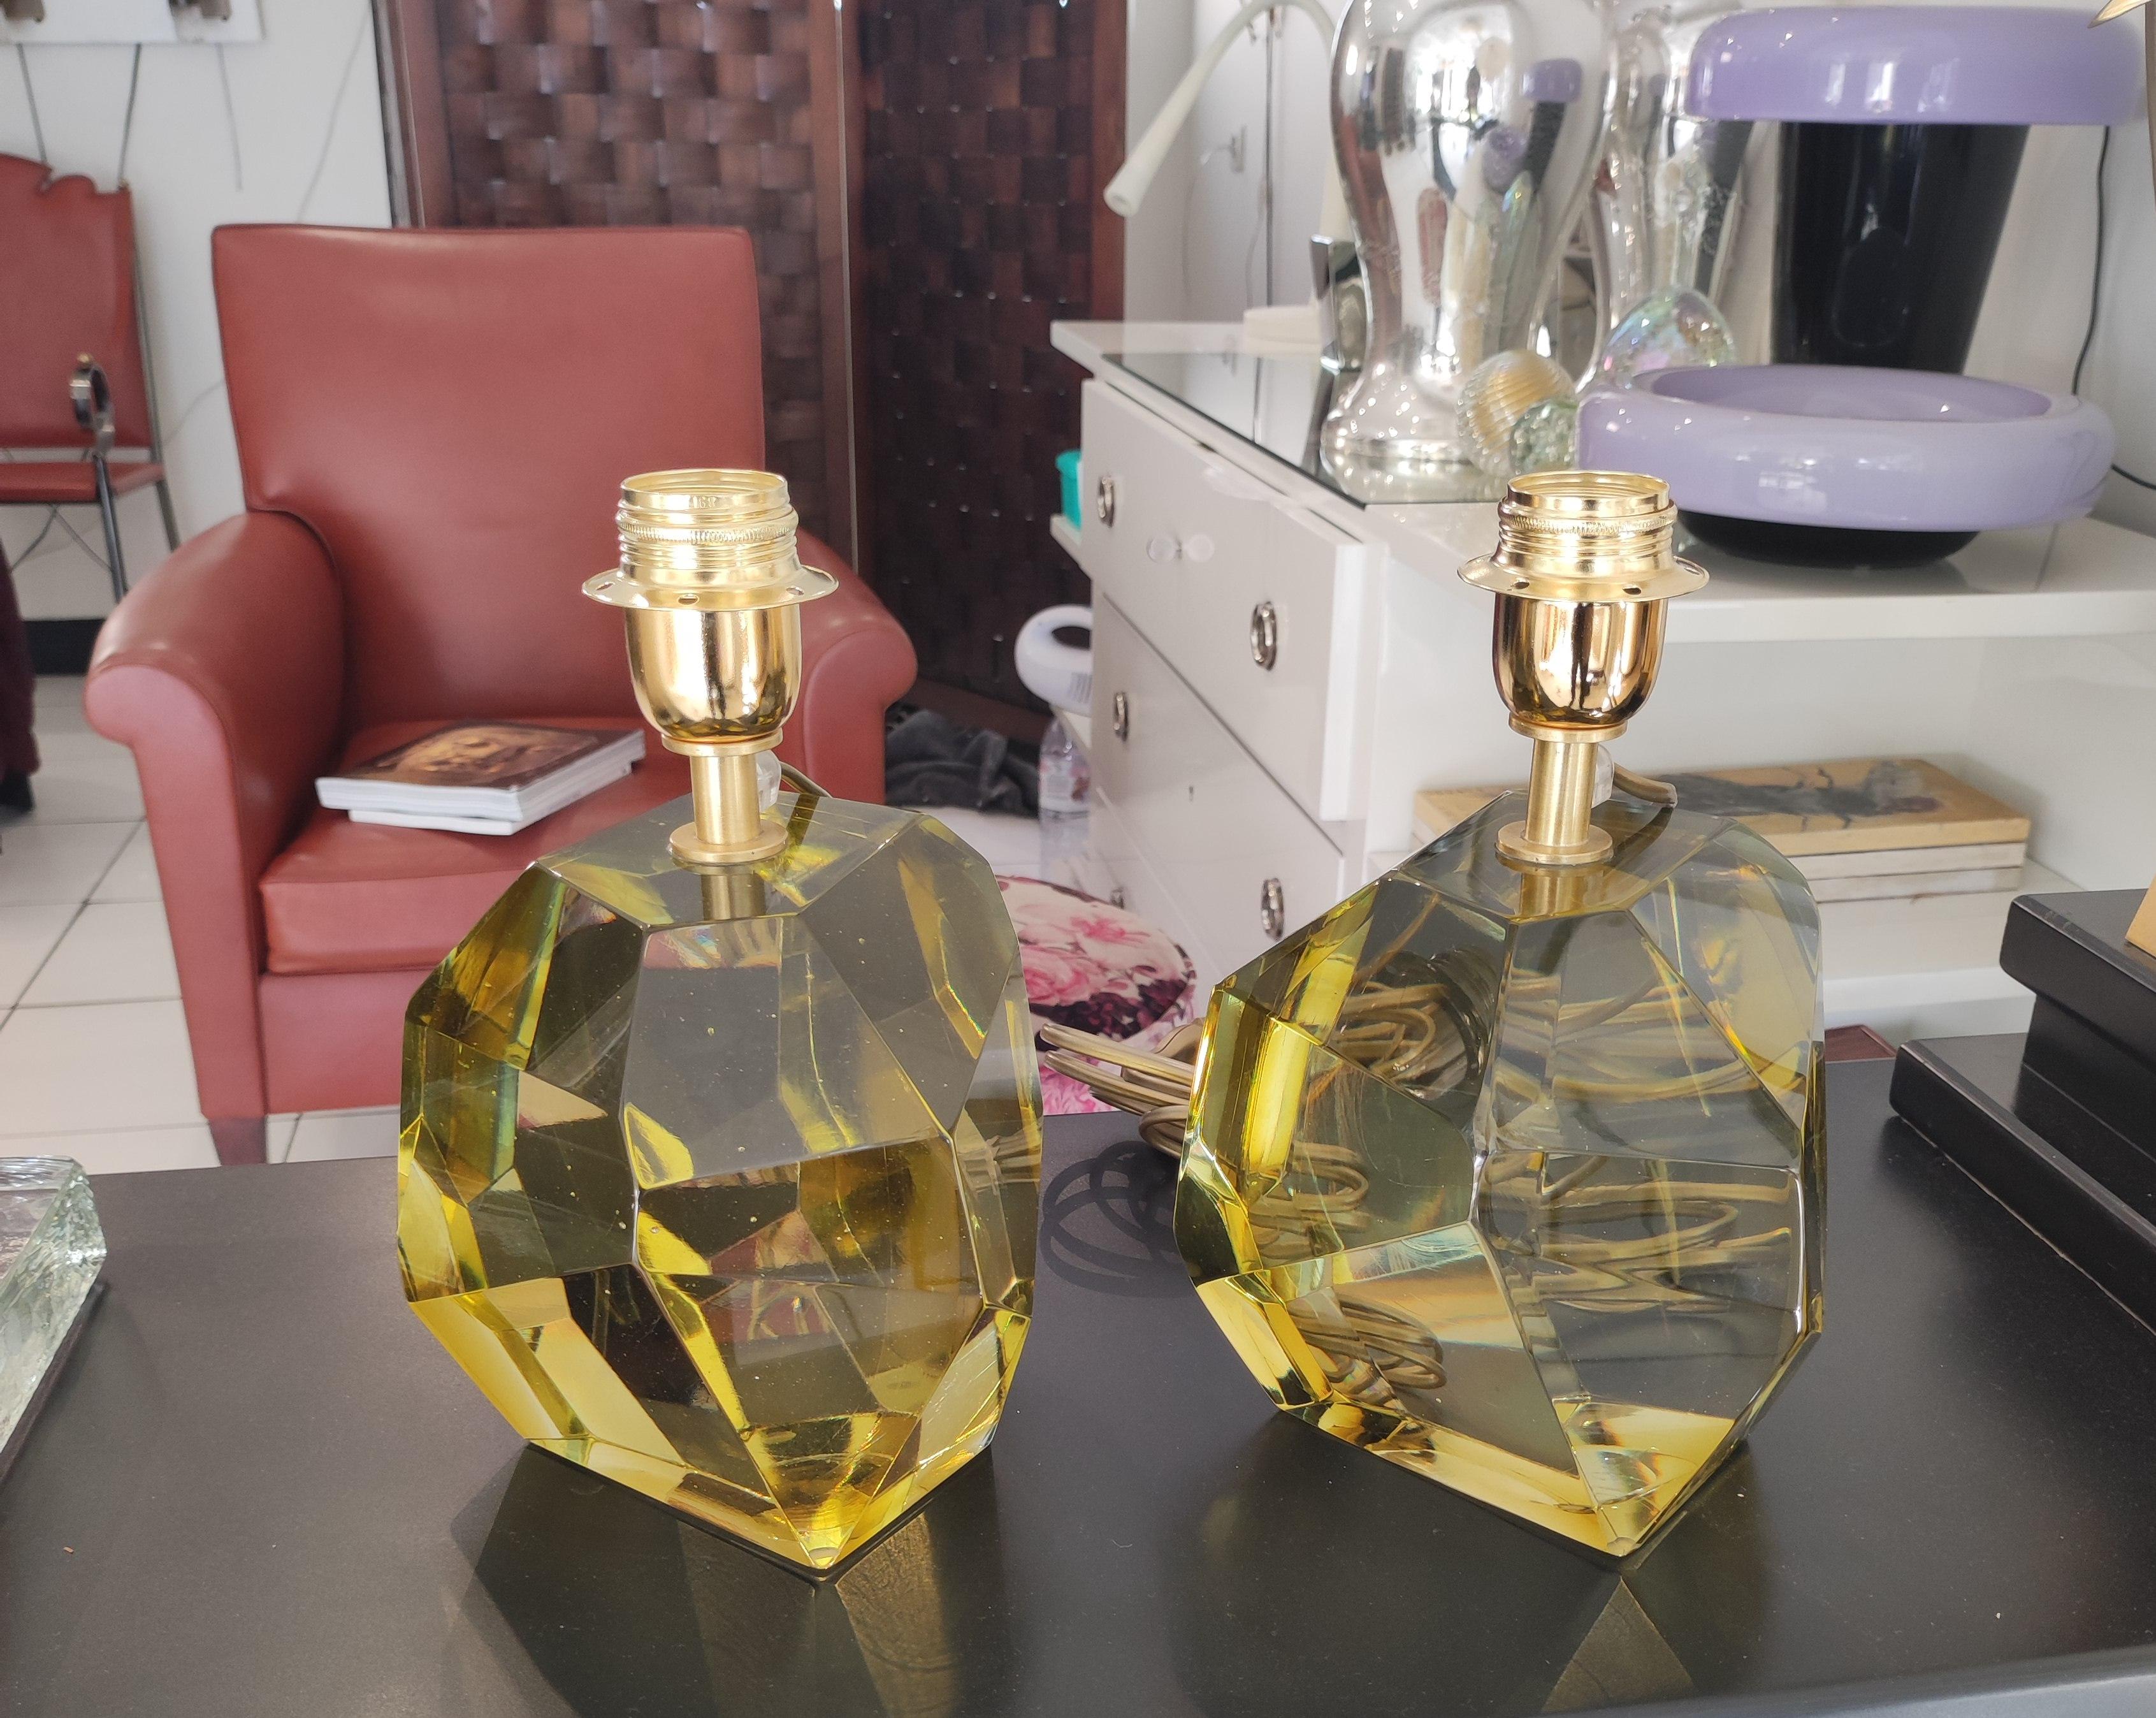 Yellow crystal faceted table lamp attb Toso, perfect condition
Pair can be separated upon request